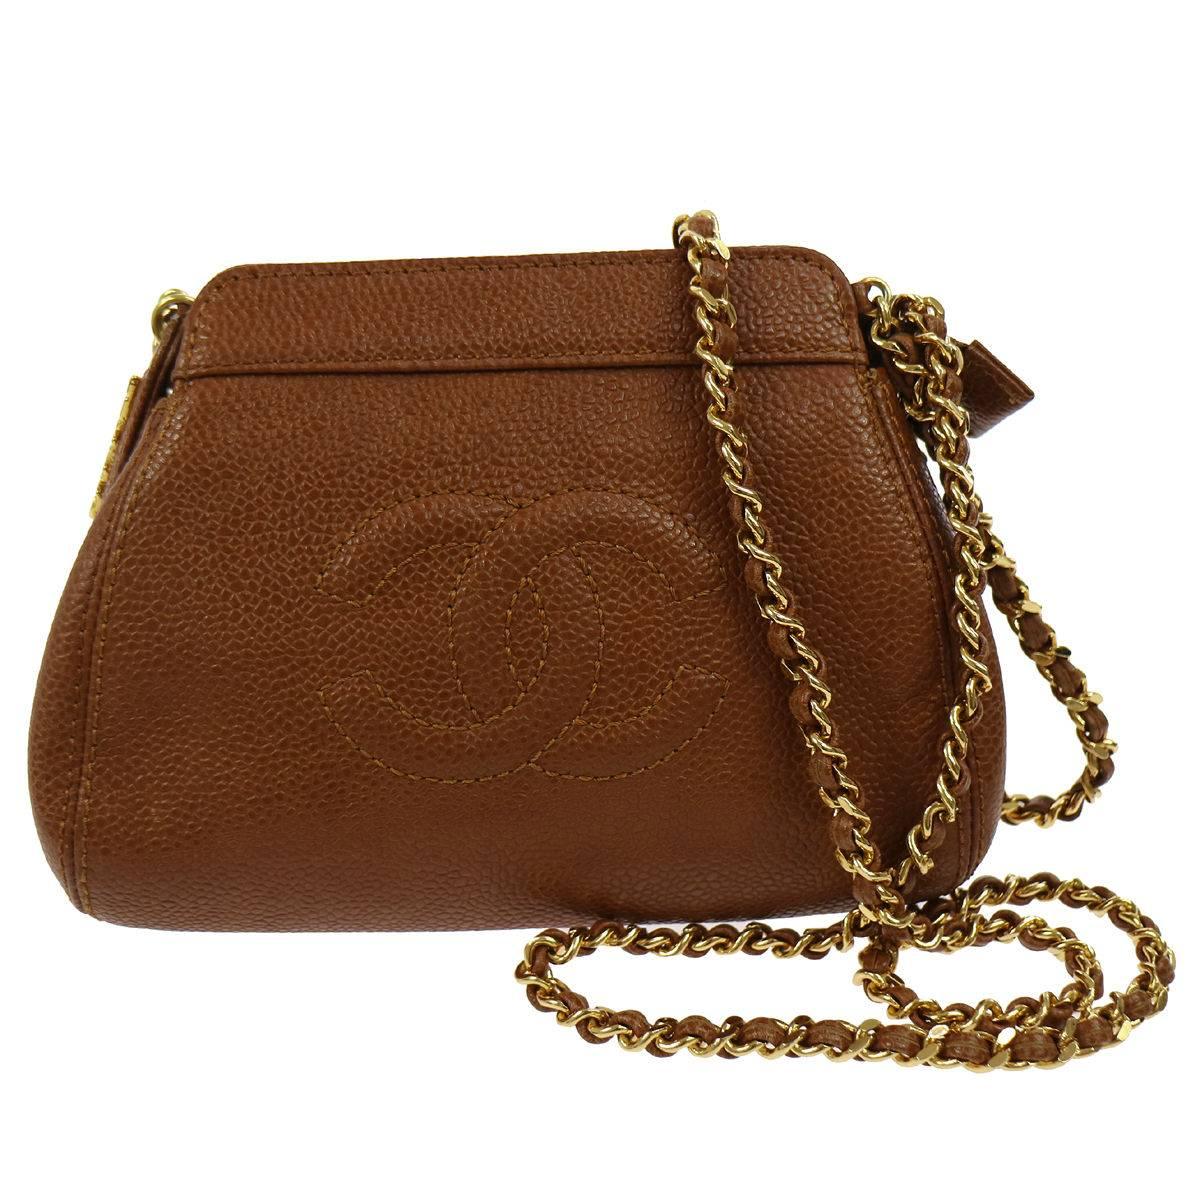 Chanel Caramel Caviar Leather Small Party Evening Shoulder Bag